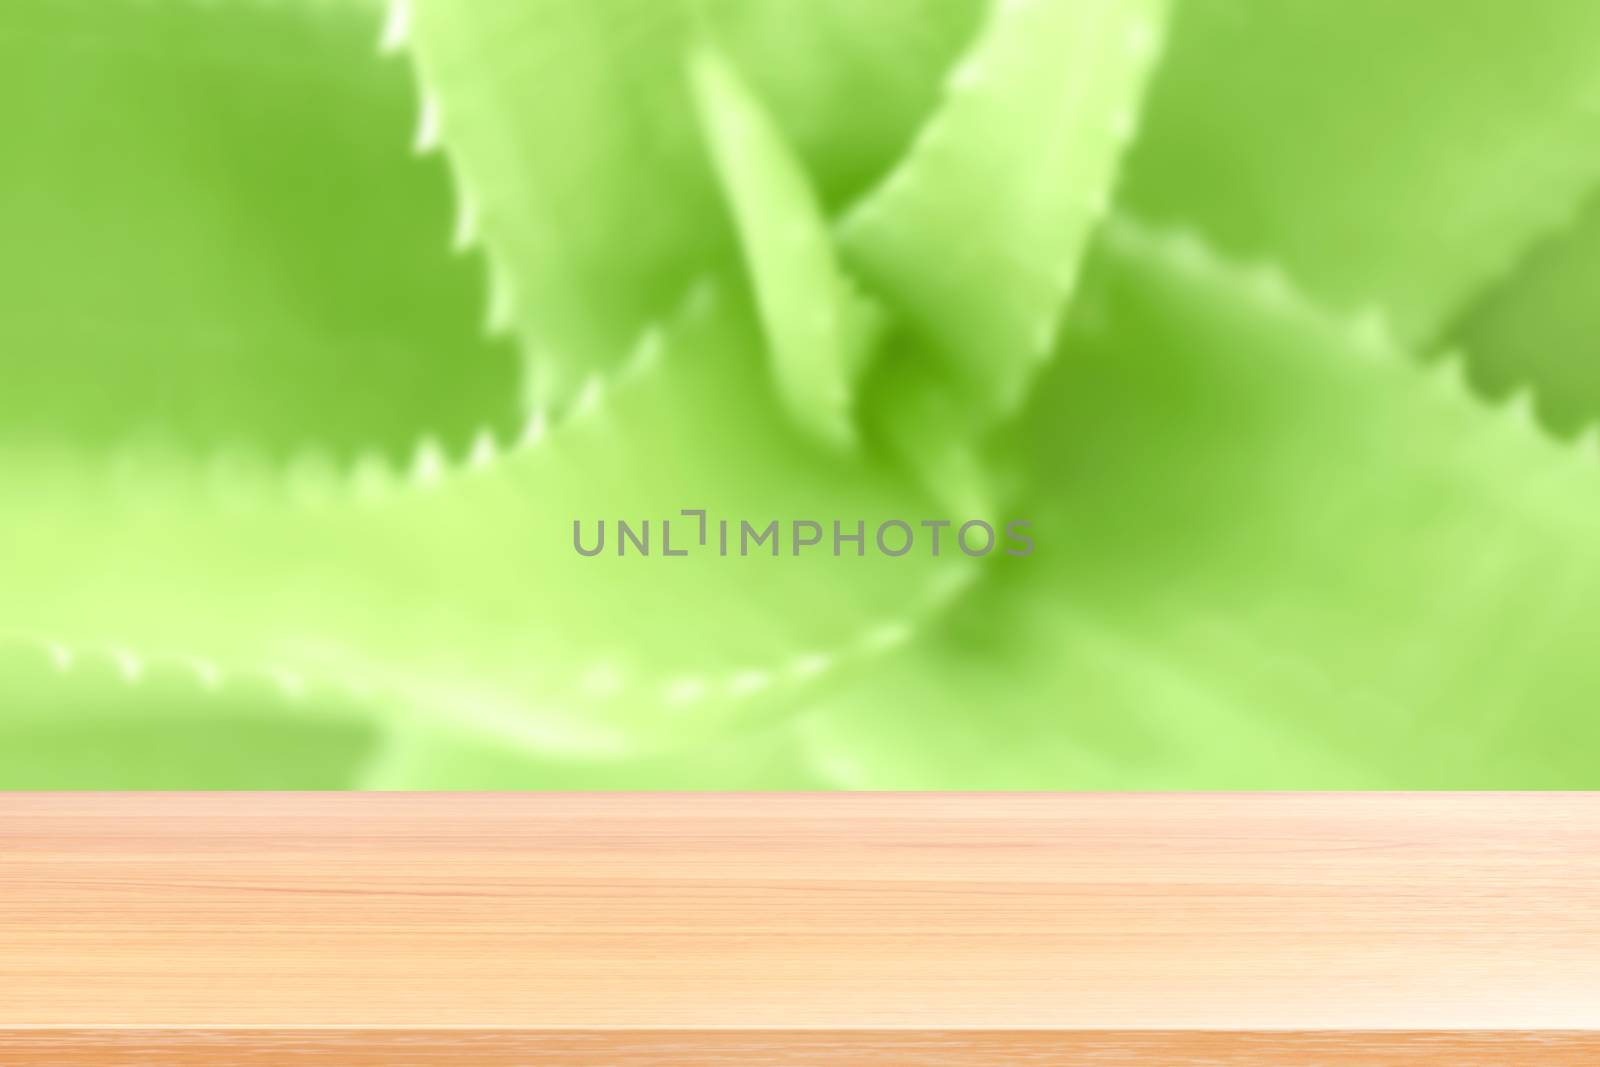 wood plank on aloe vera leaf blurred green fresh nature background, empty wood table floors on aloe vera blurred green fresh nature background, wood table board empty front aloe vera leaf fresh by cgdeaw